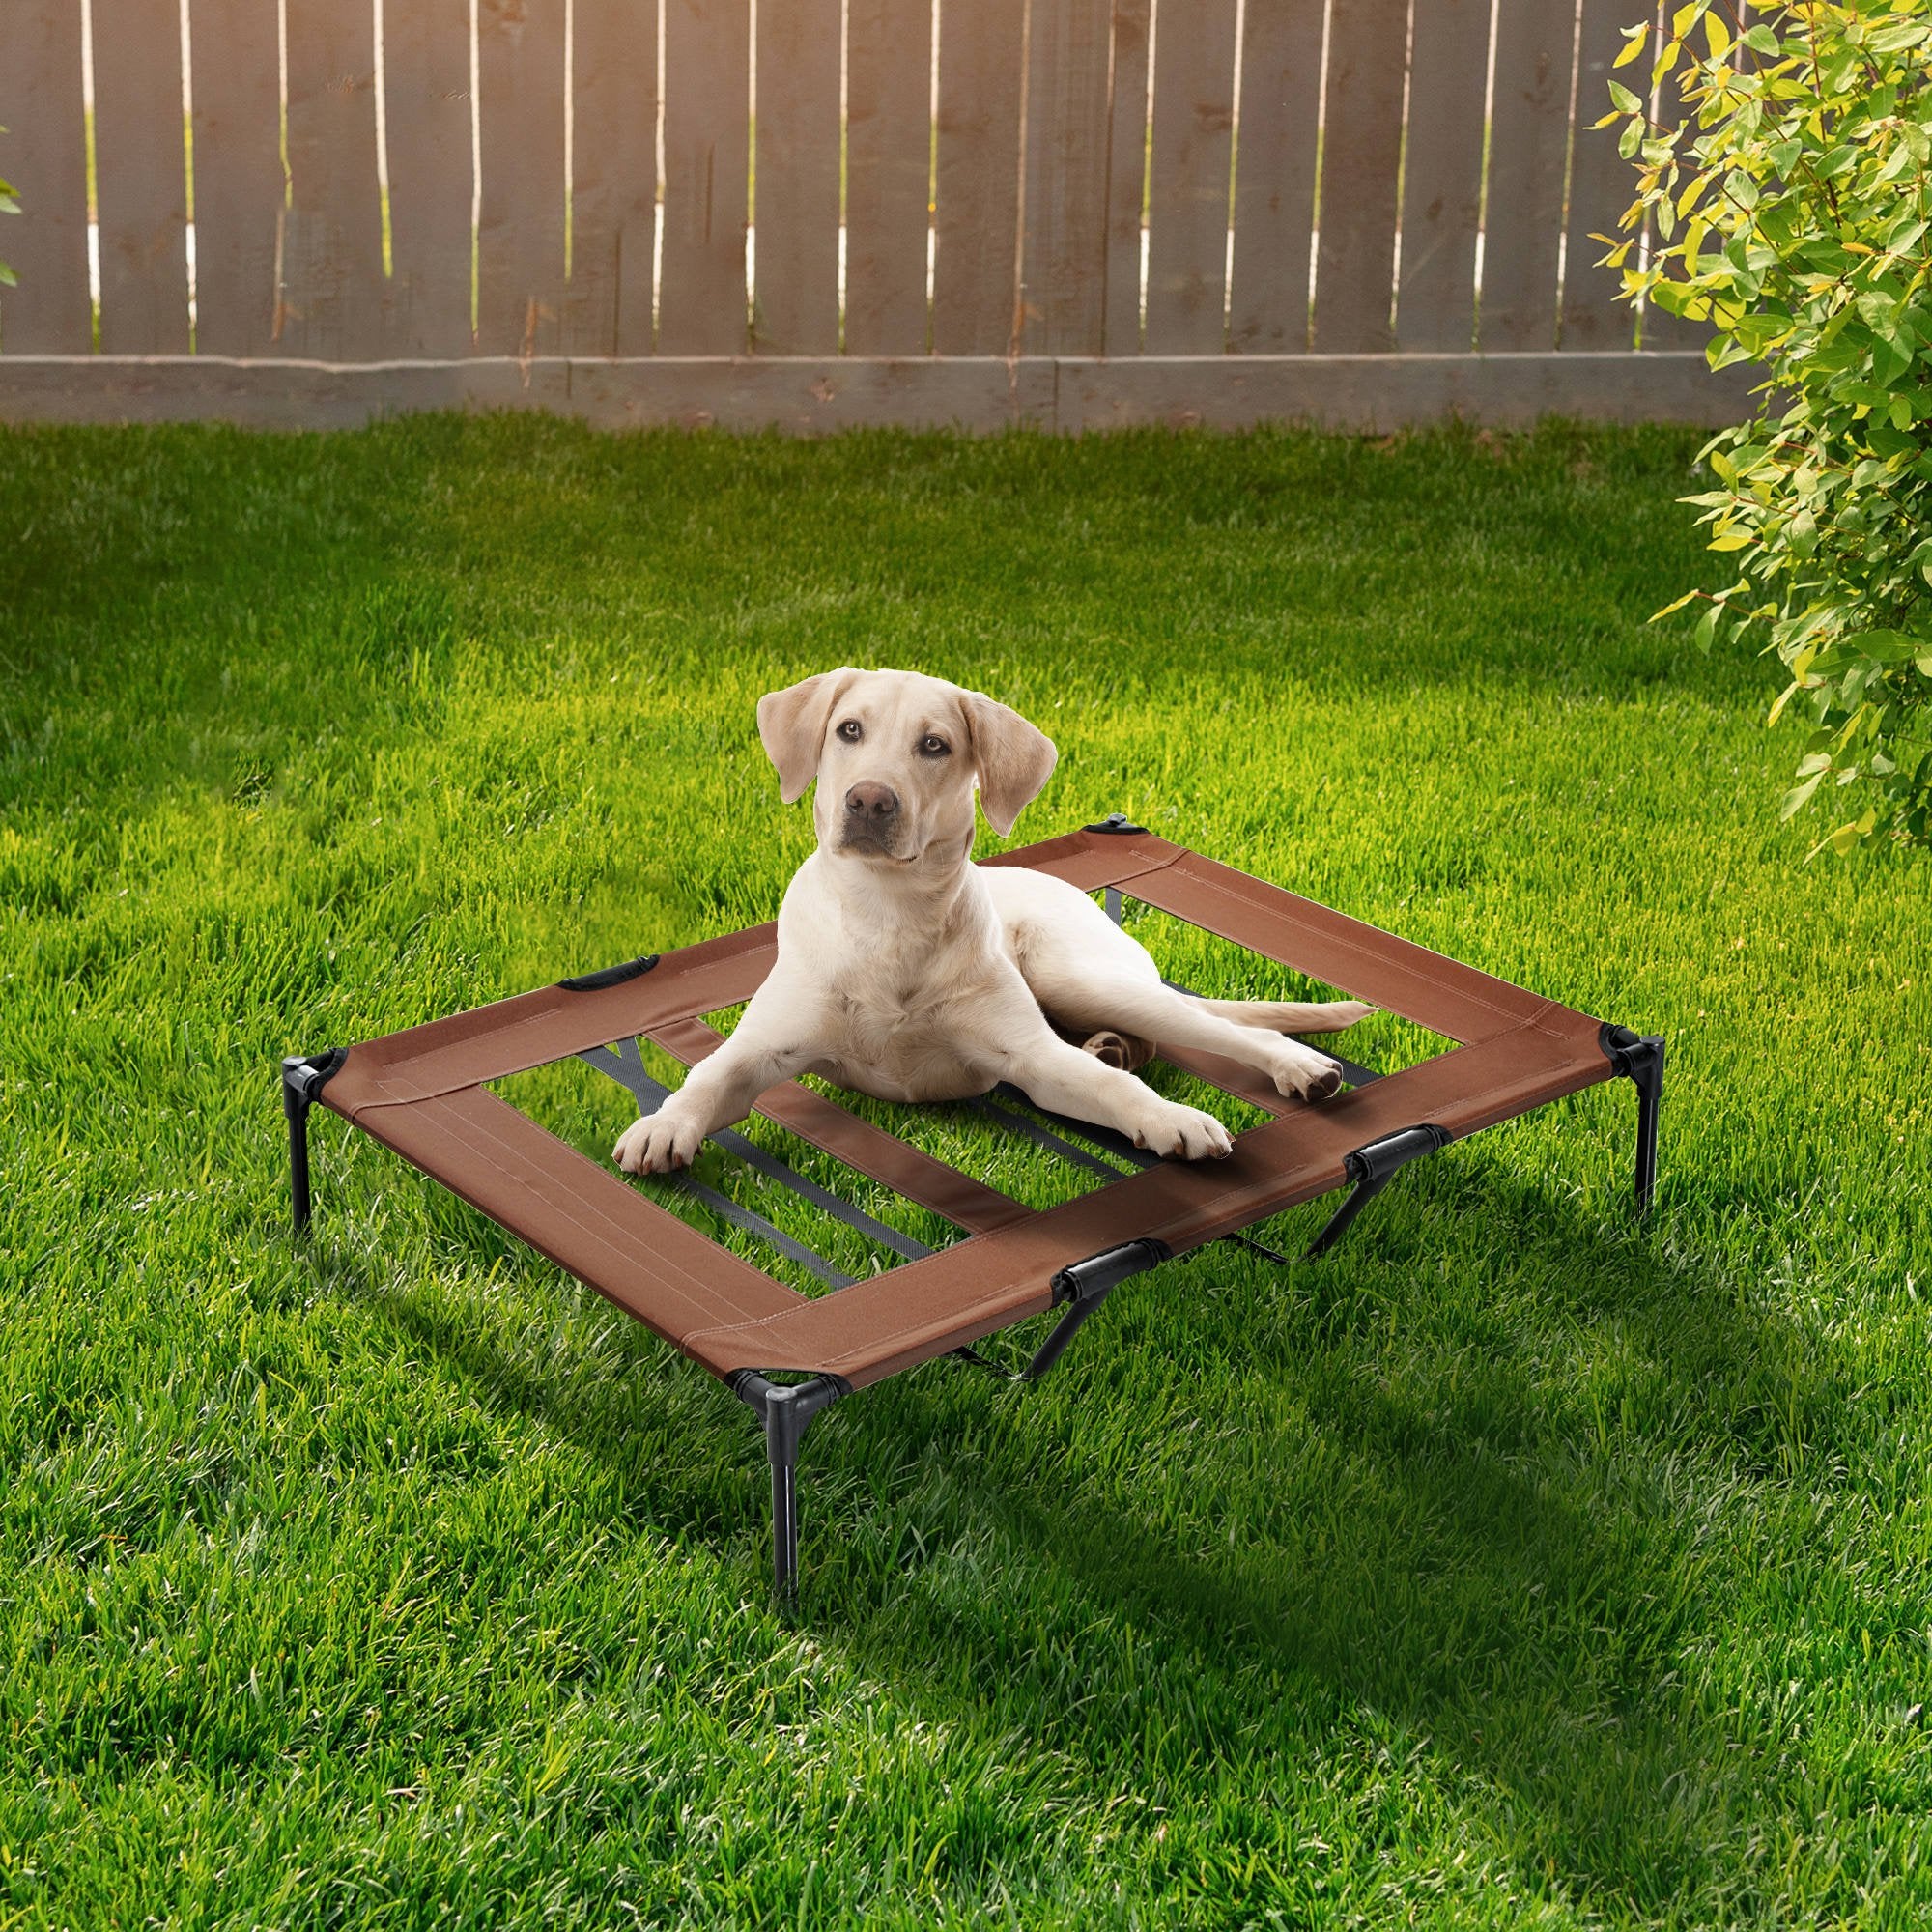 PawHut Cooling Elevated Dog Bed Portable Raised Pet Cot with Breathable Mesh, No-Slip Rubber Feet for Indoor & Outdoor Use, Brown - Inspirely